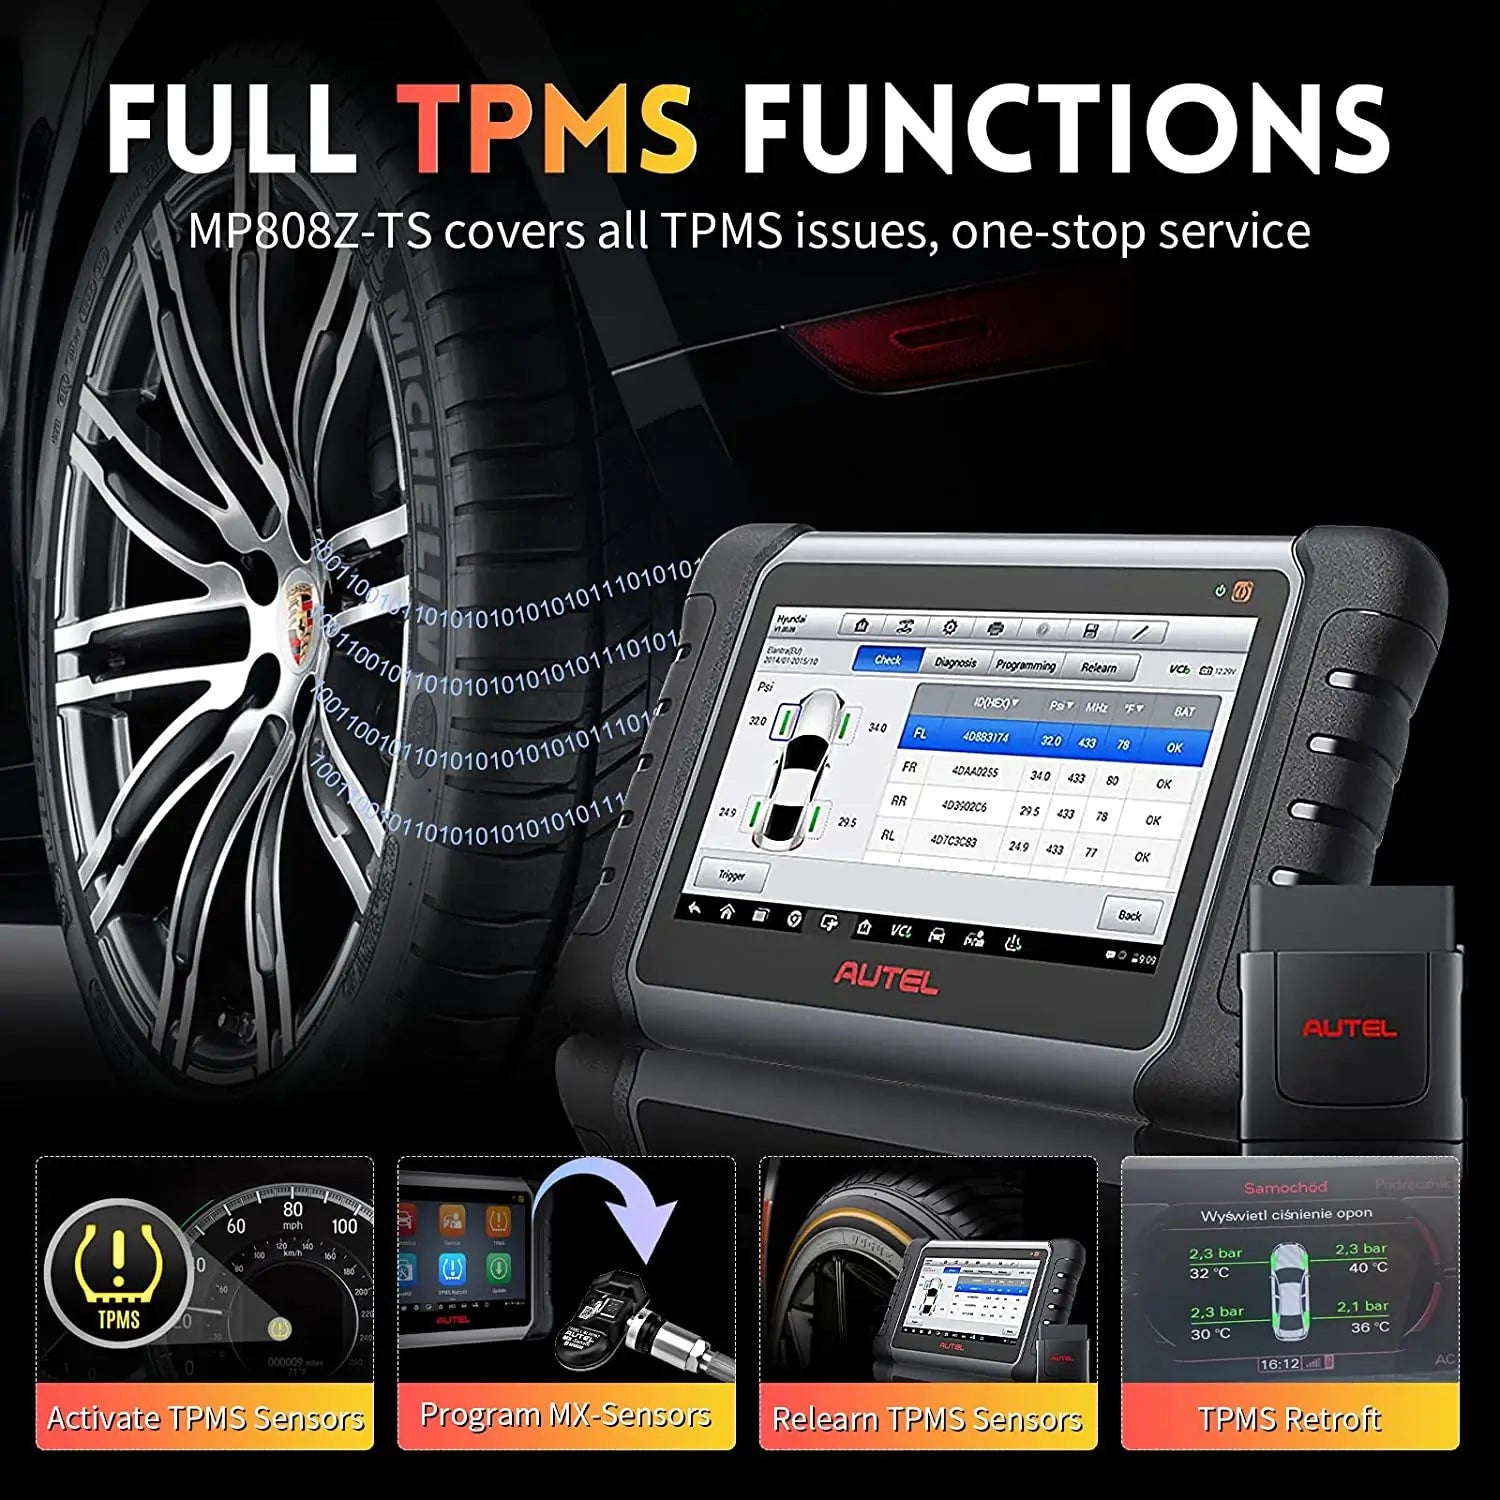 Autel MP808Z-TS with Full TPMS Functions for Vehicle Test